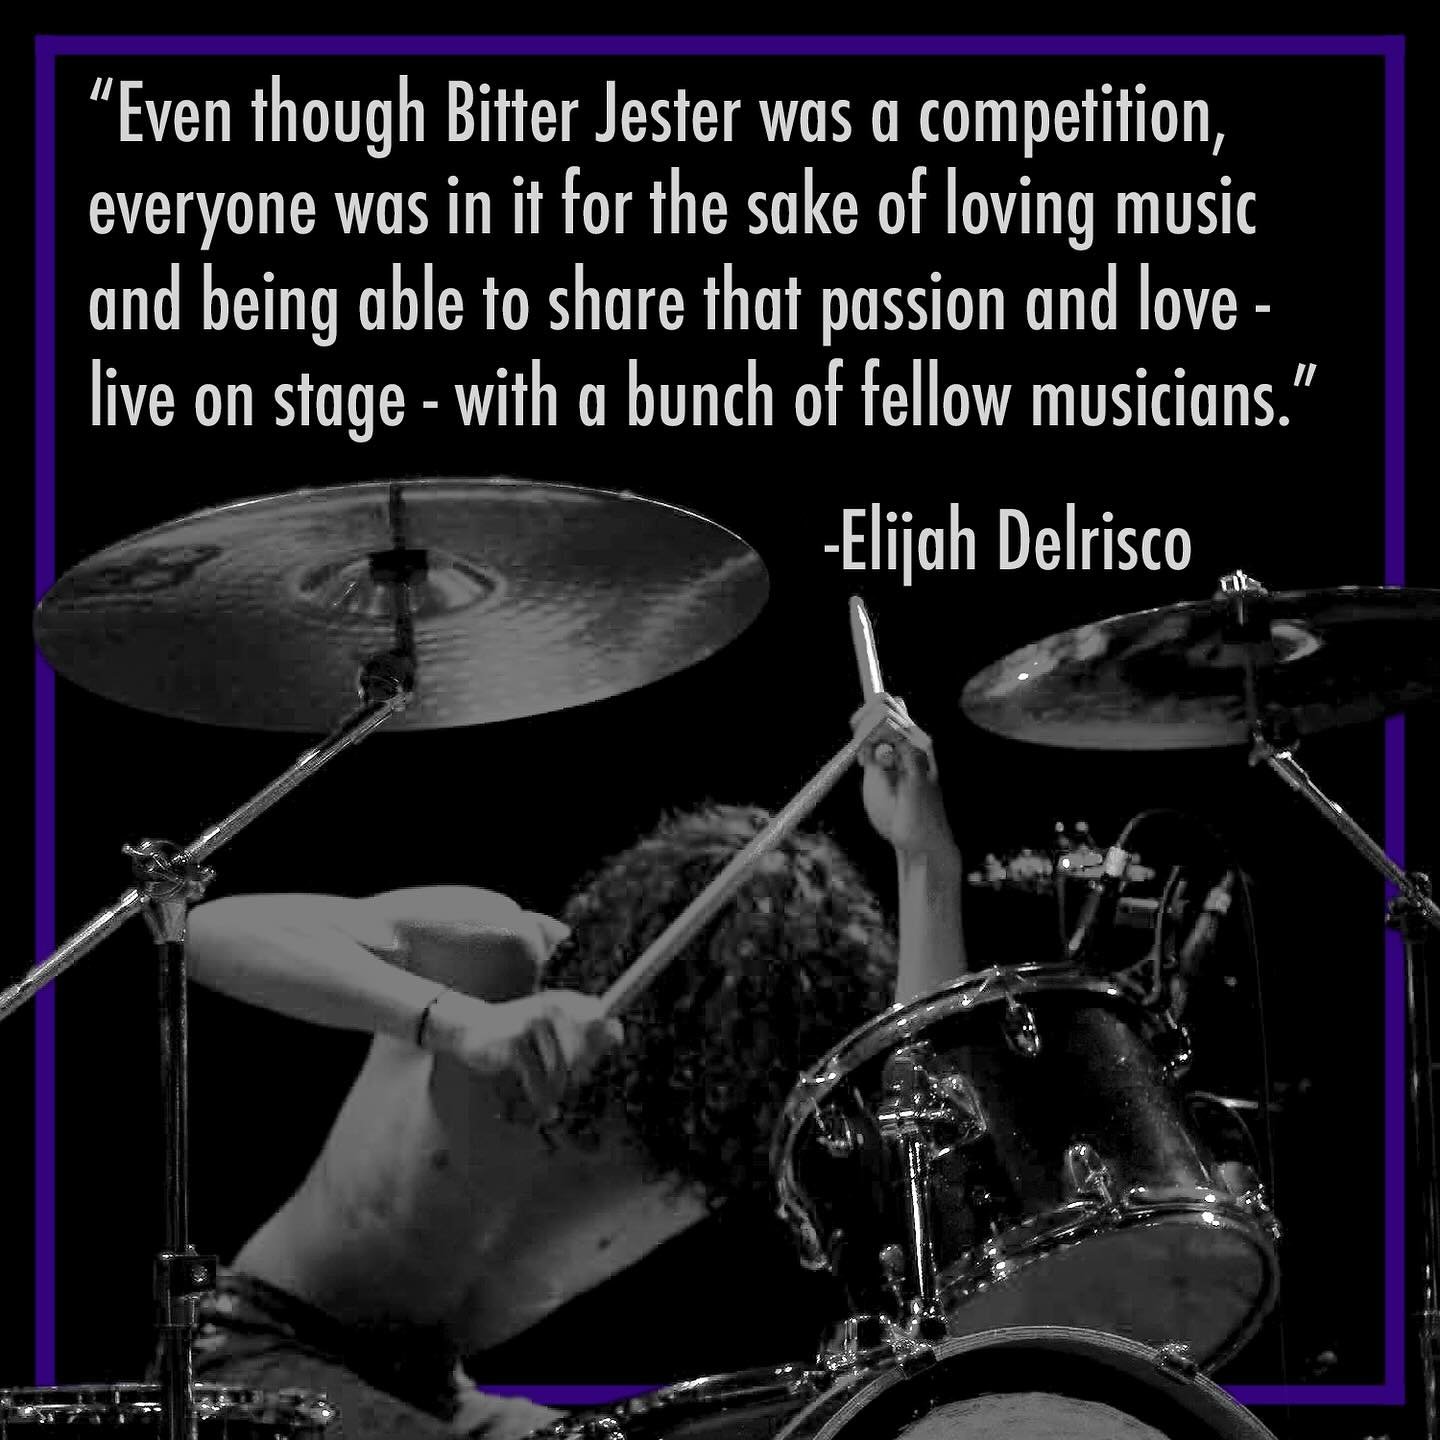 Apply to Bitter Jester Music Fest today - deadline in TWO WEEKS! Only requirement: at least half the members of a band must be 21 or younger to apply (link in bio)!

Elijah is a former multi-year competitor in BJMF (and a future judge)! His thoughts 